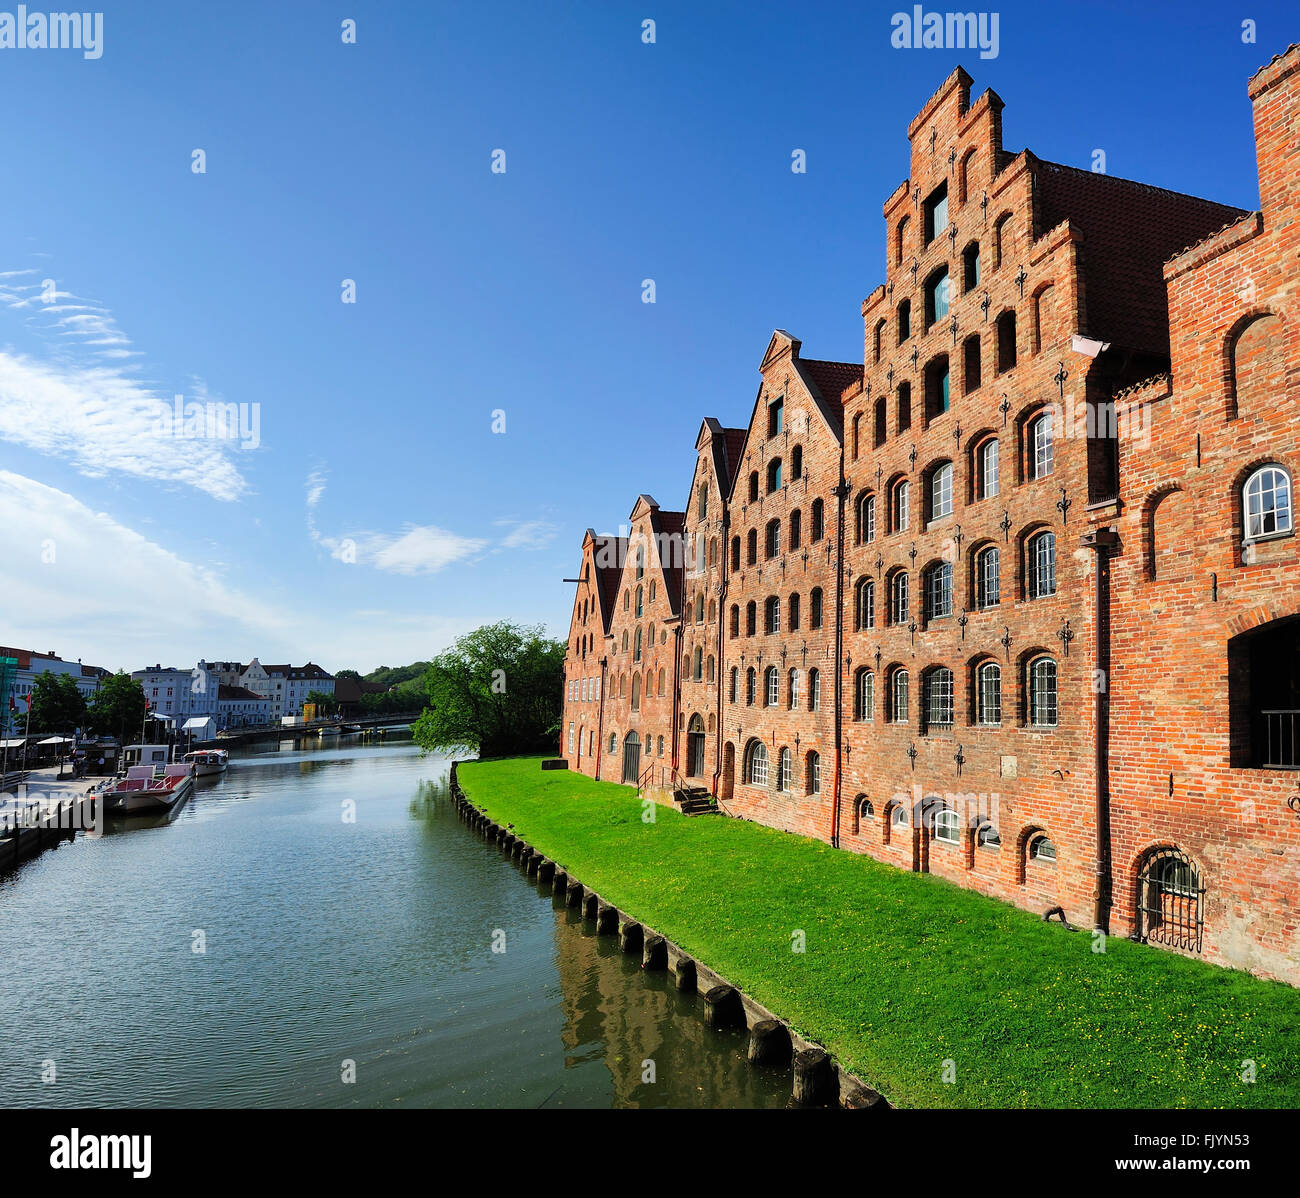 The Salzspeicher (salt storehouses), historic brick buildings, built in the 16th-18th century, Lubeck, Germany. Stock Photo